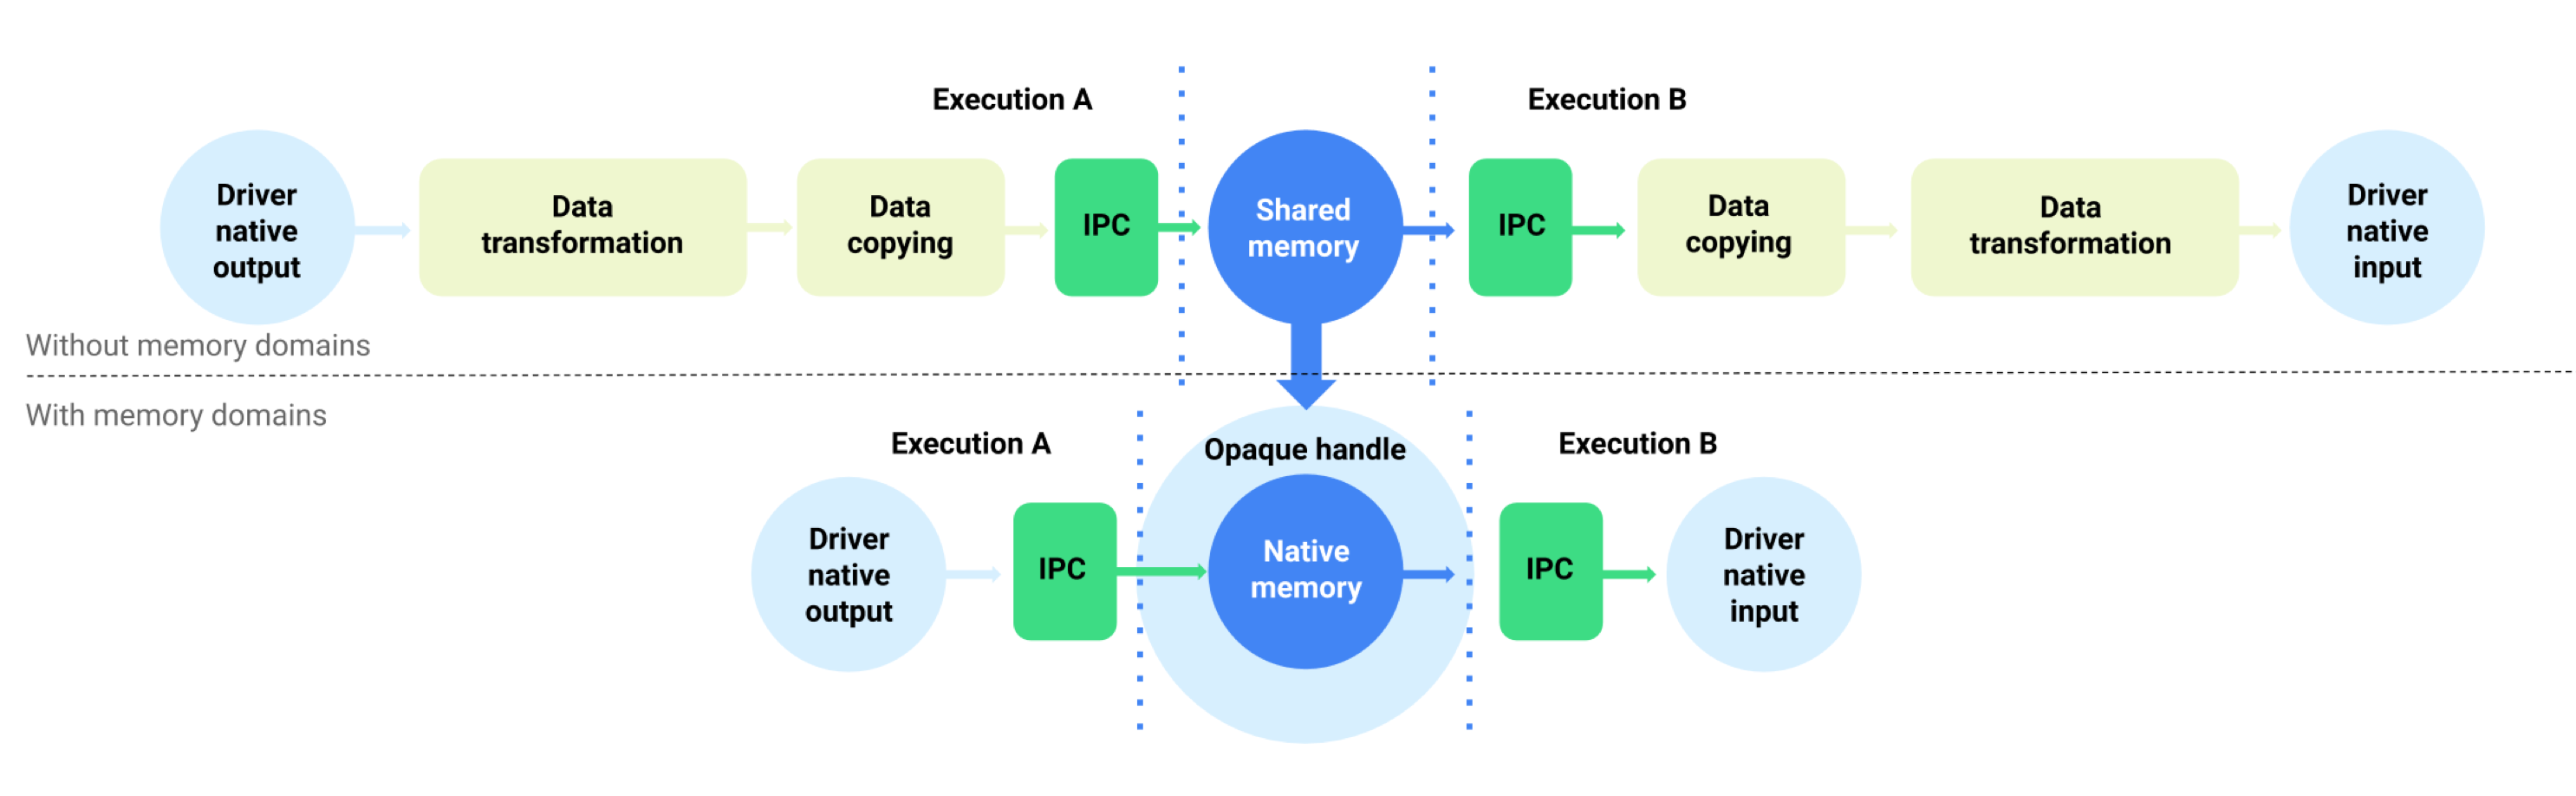 Buffer data flow with and without memory domains